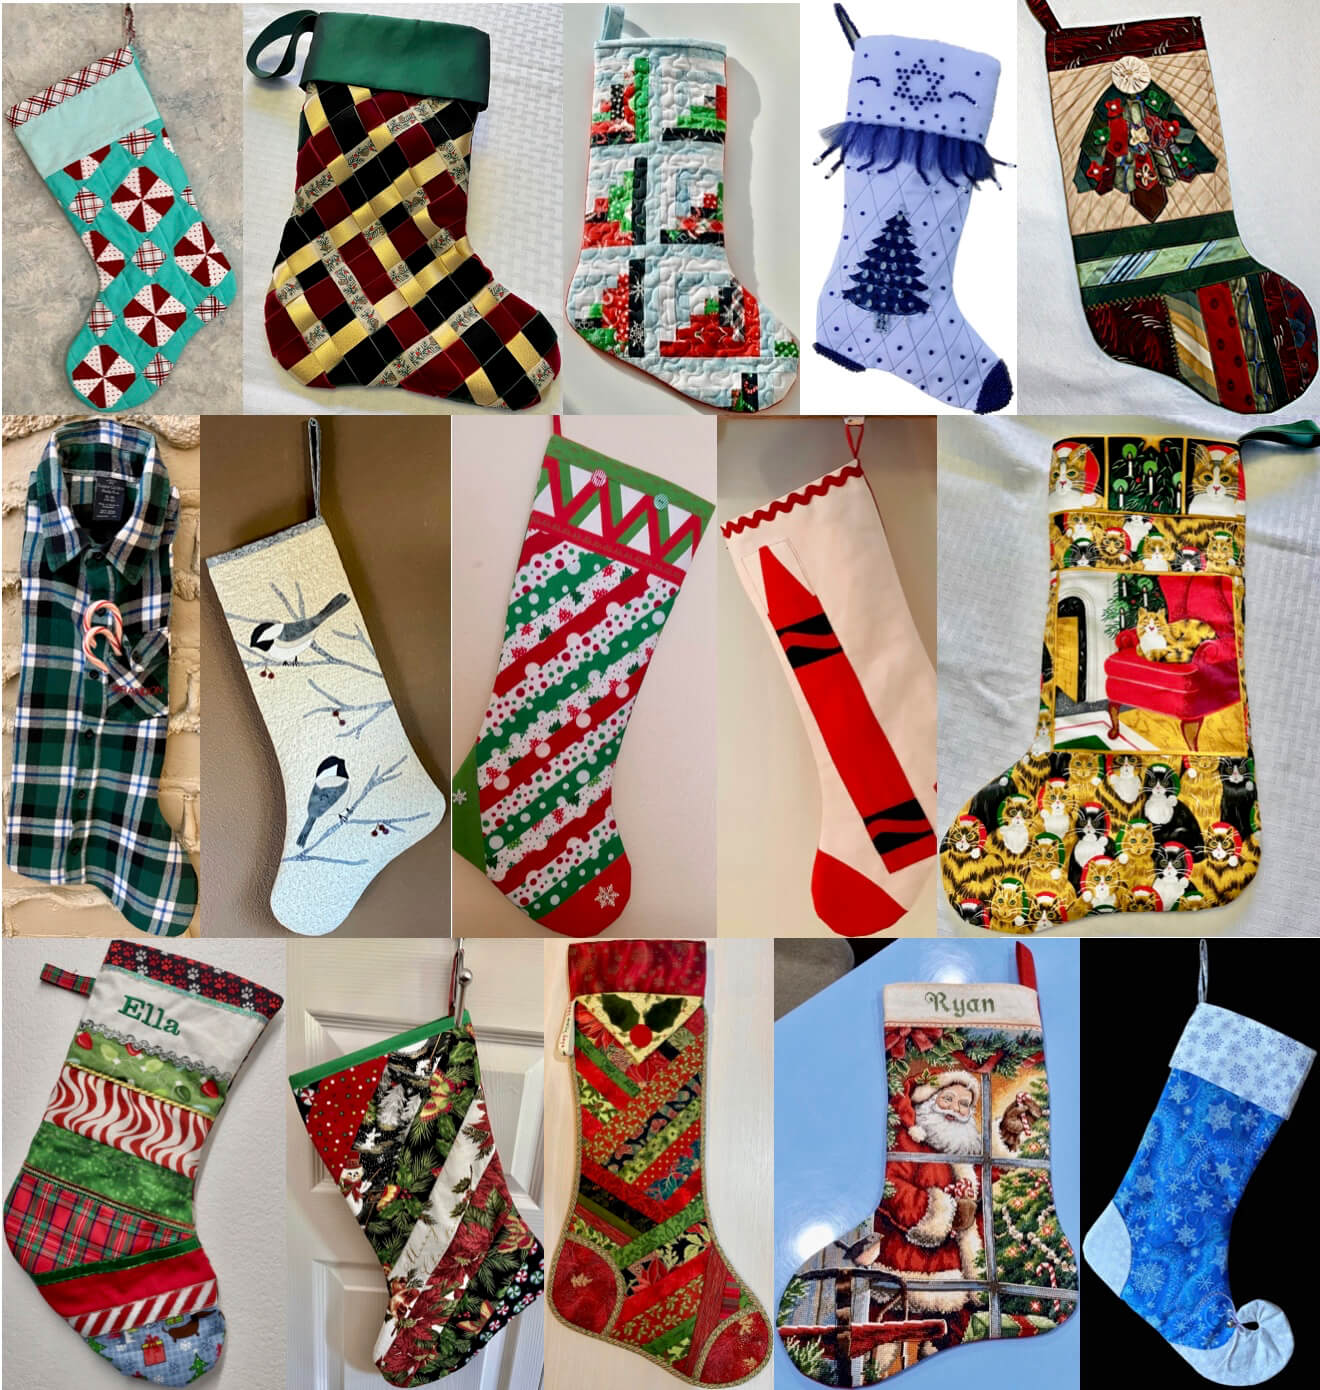 2022 NZP Christmas Stocking Sewing Challenge Winners Announced